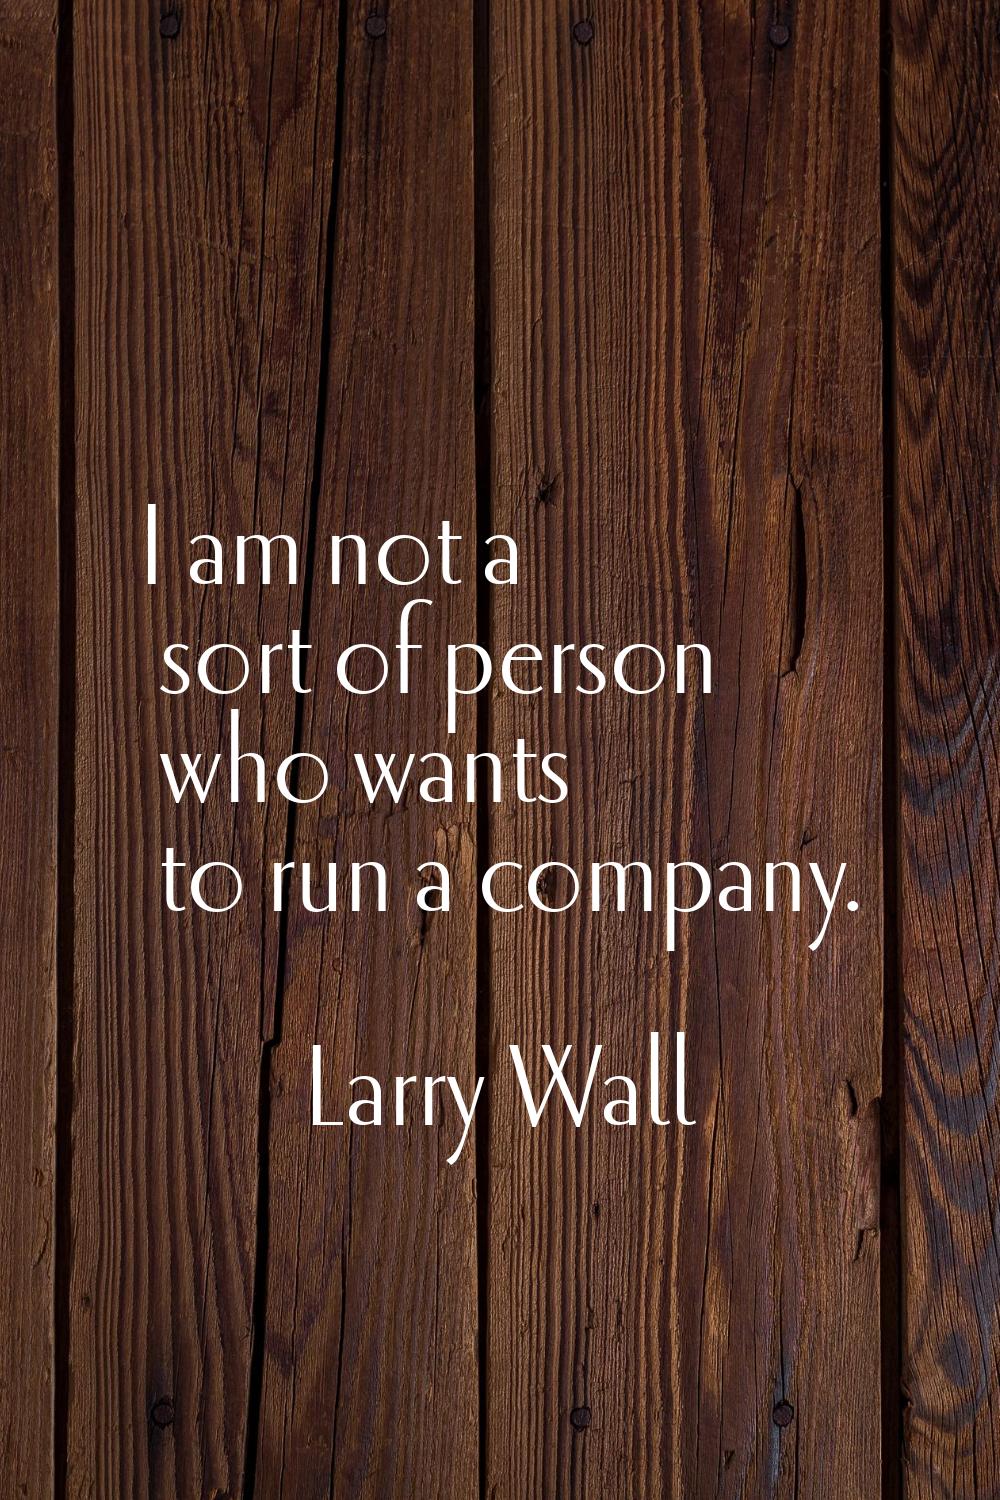 I am not a sort of person who wants to run a company.